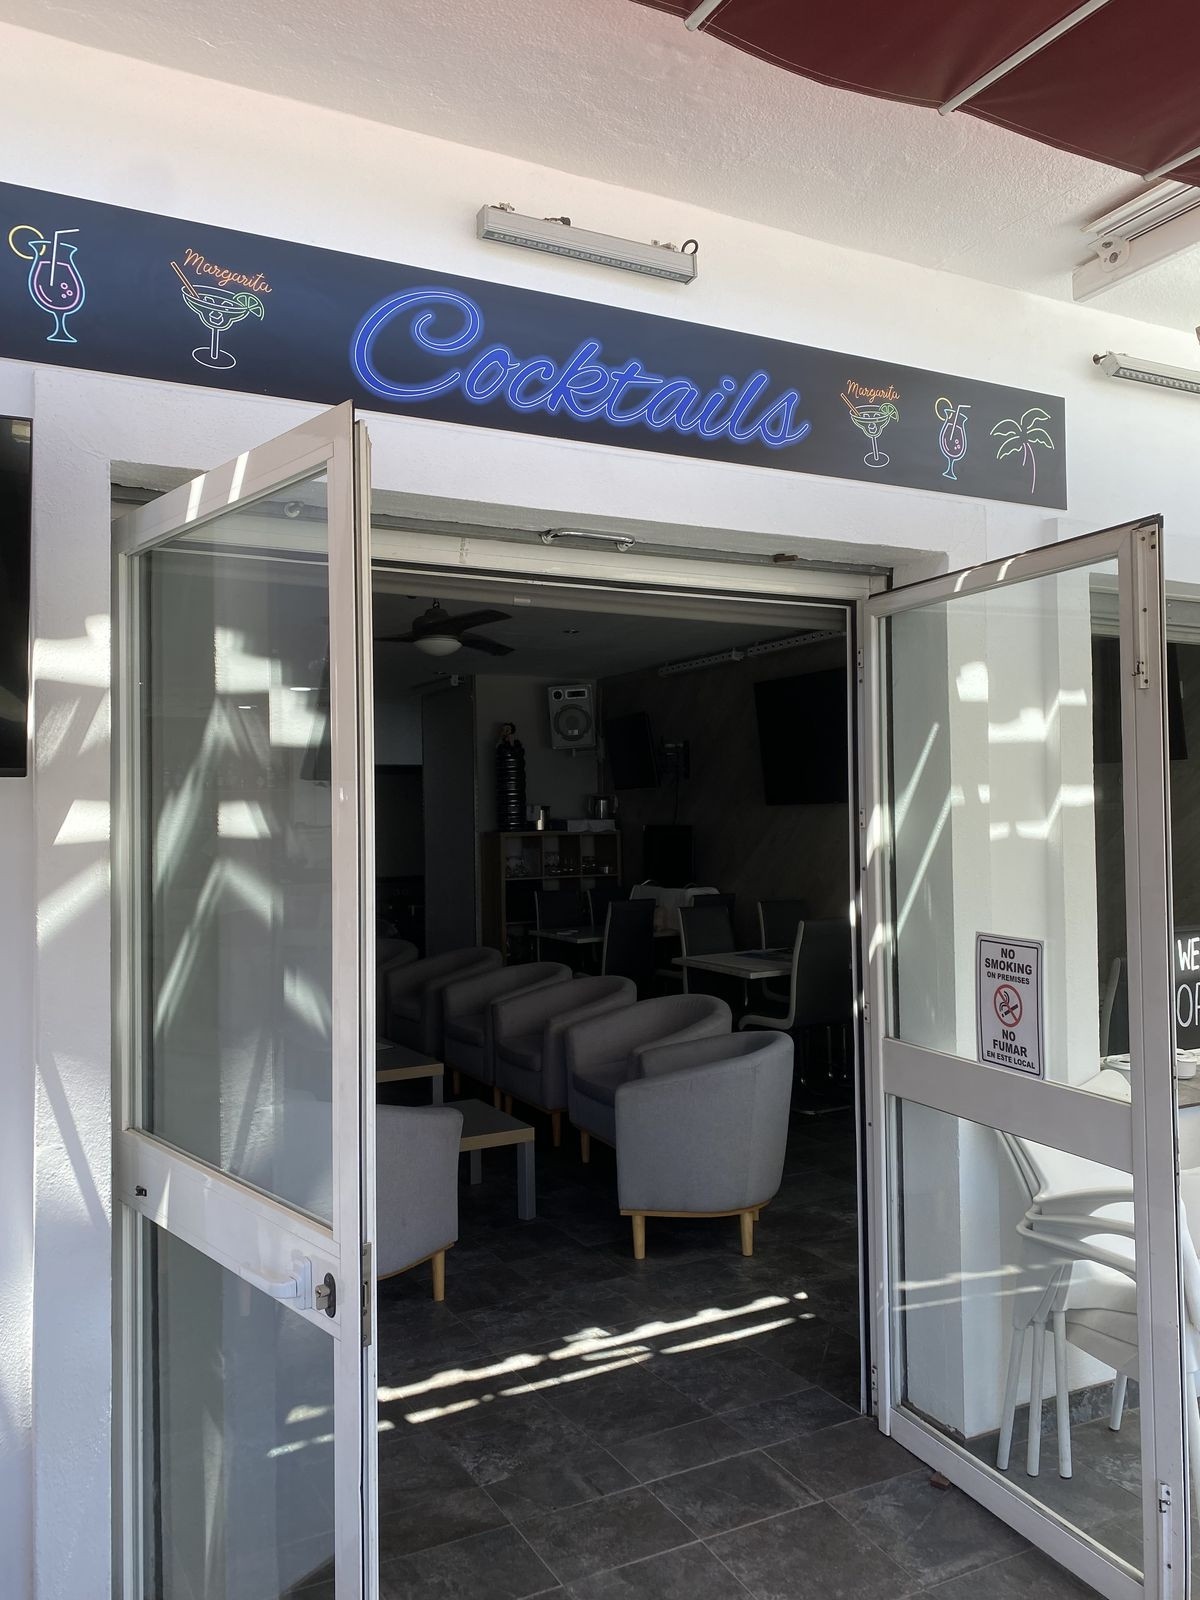 						Commercial  Bar
													for sale 
																			 in Calahonda
					